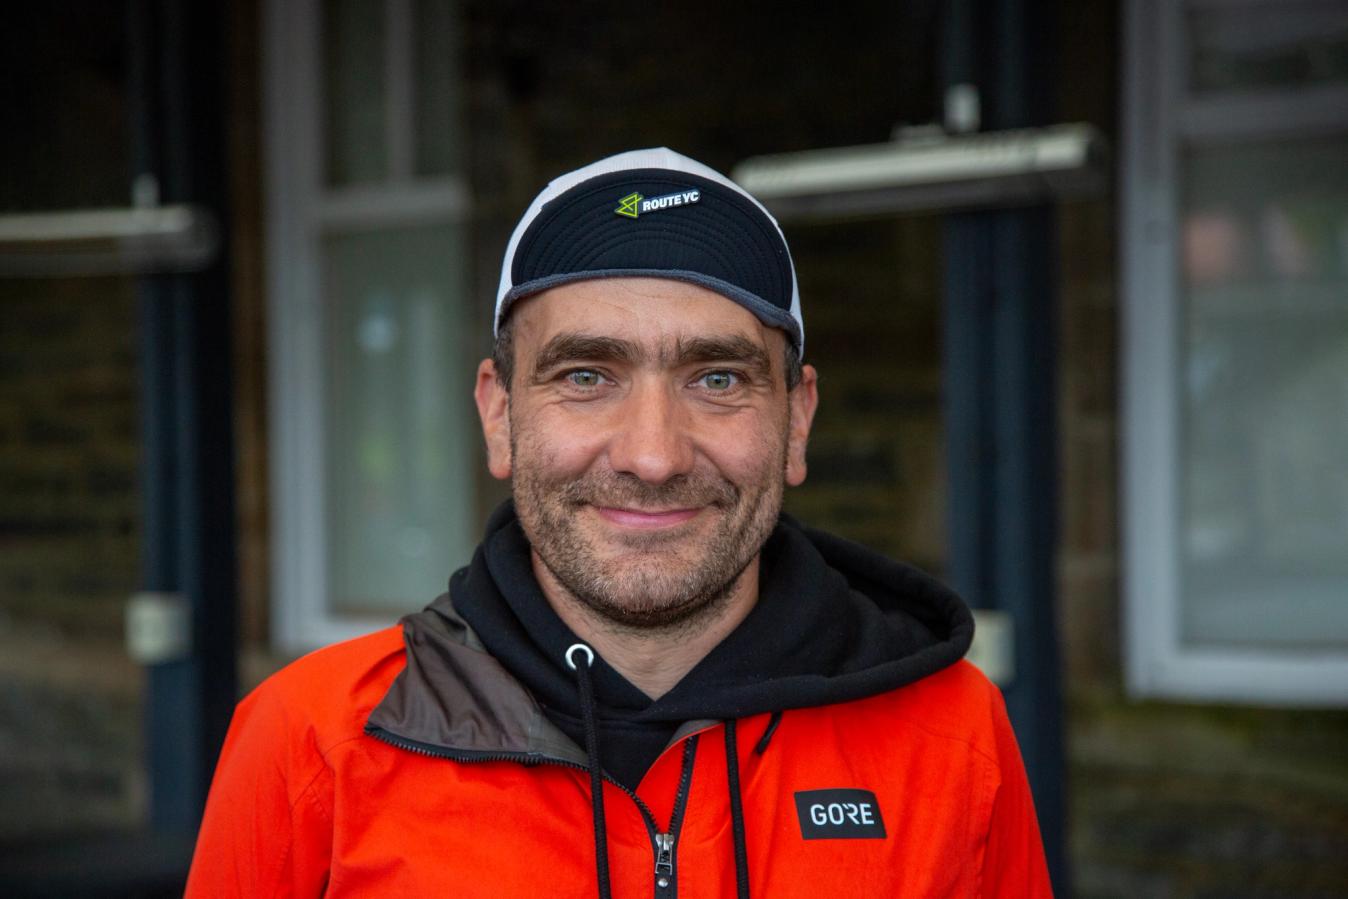 Markus Stitz at his event, the Dunoon Dash, in Scotland